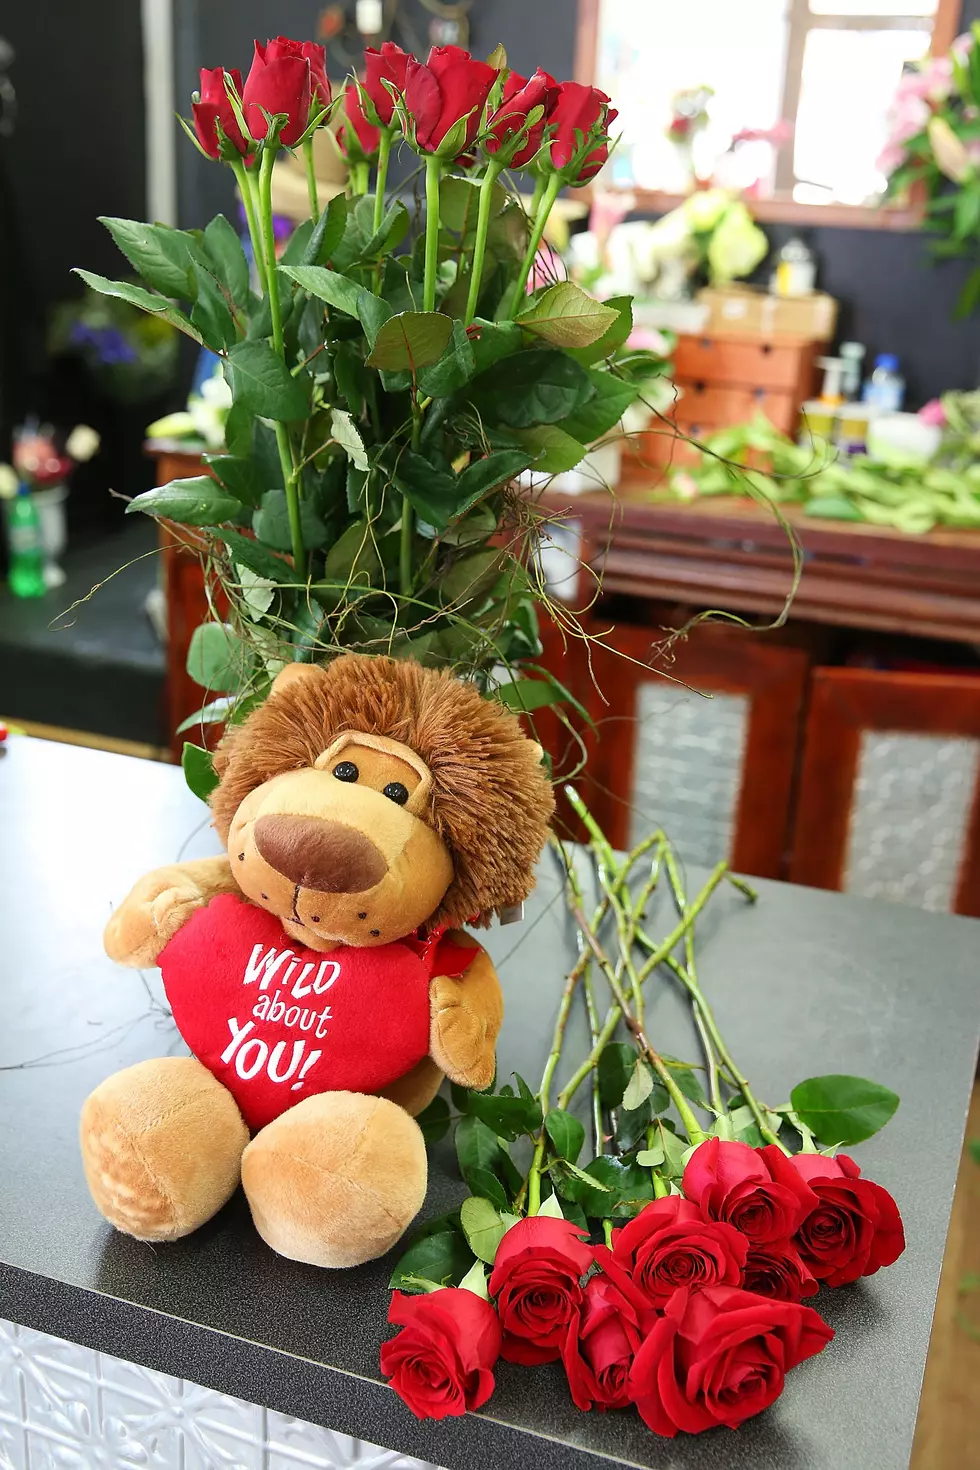 5 Tips On Keeping Valentine’s Day Flowers Fresh – Ag Matters